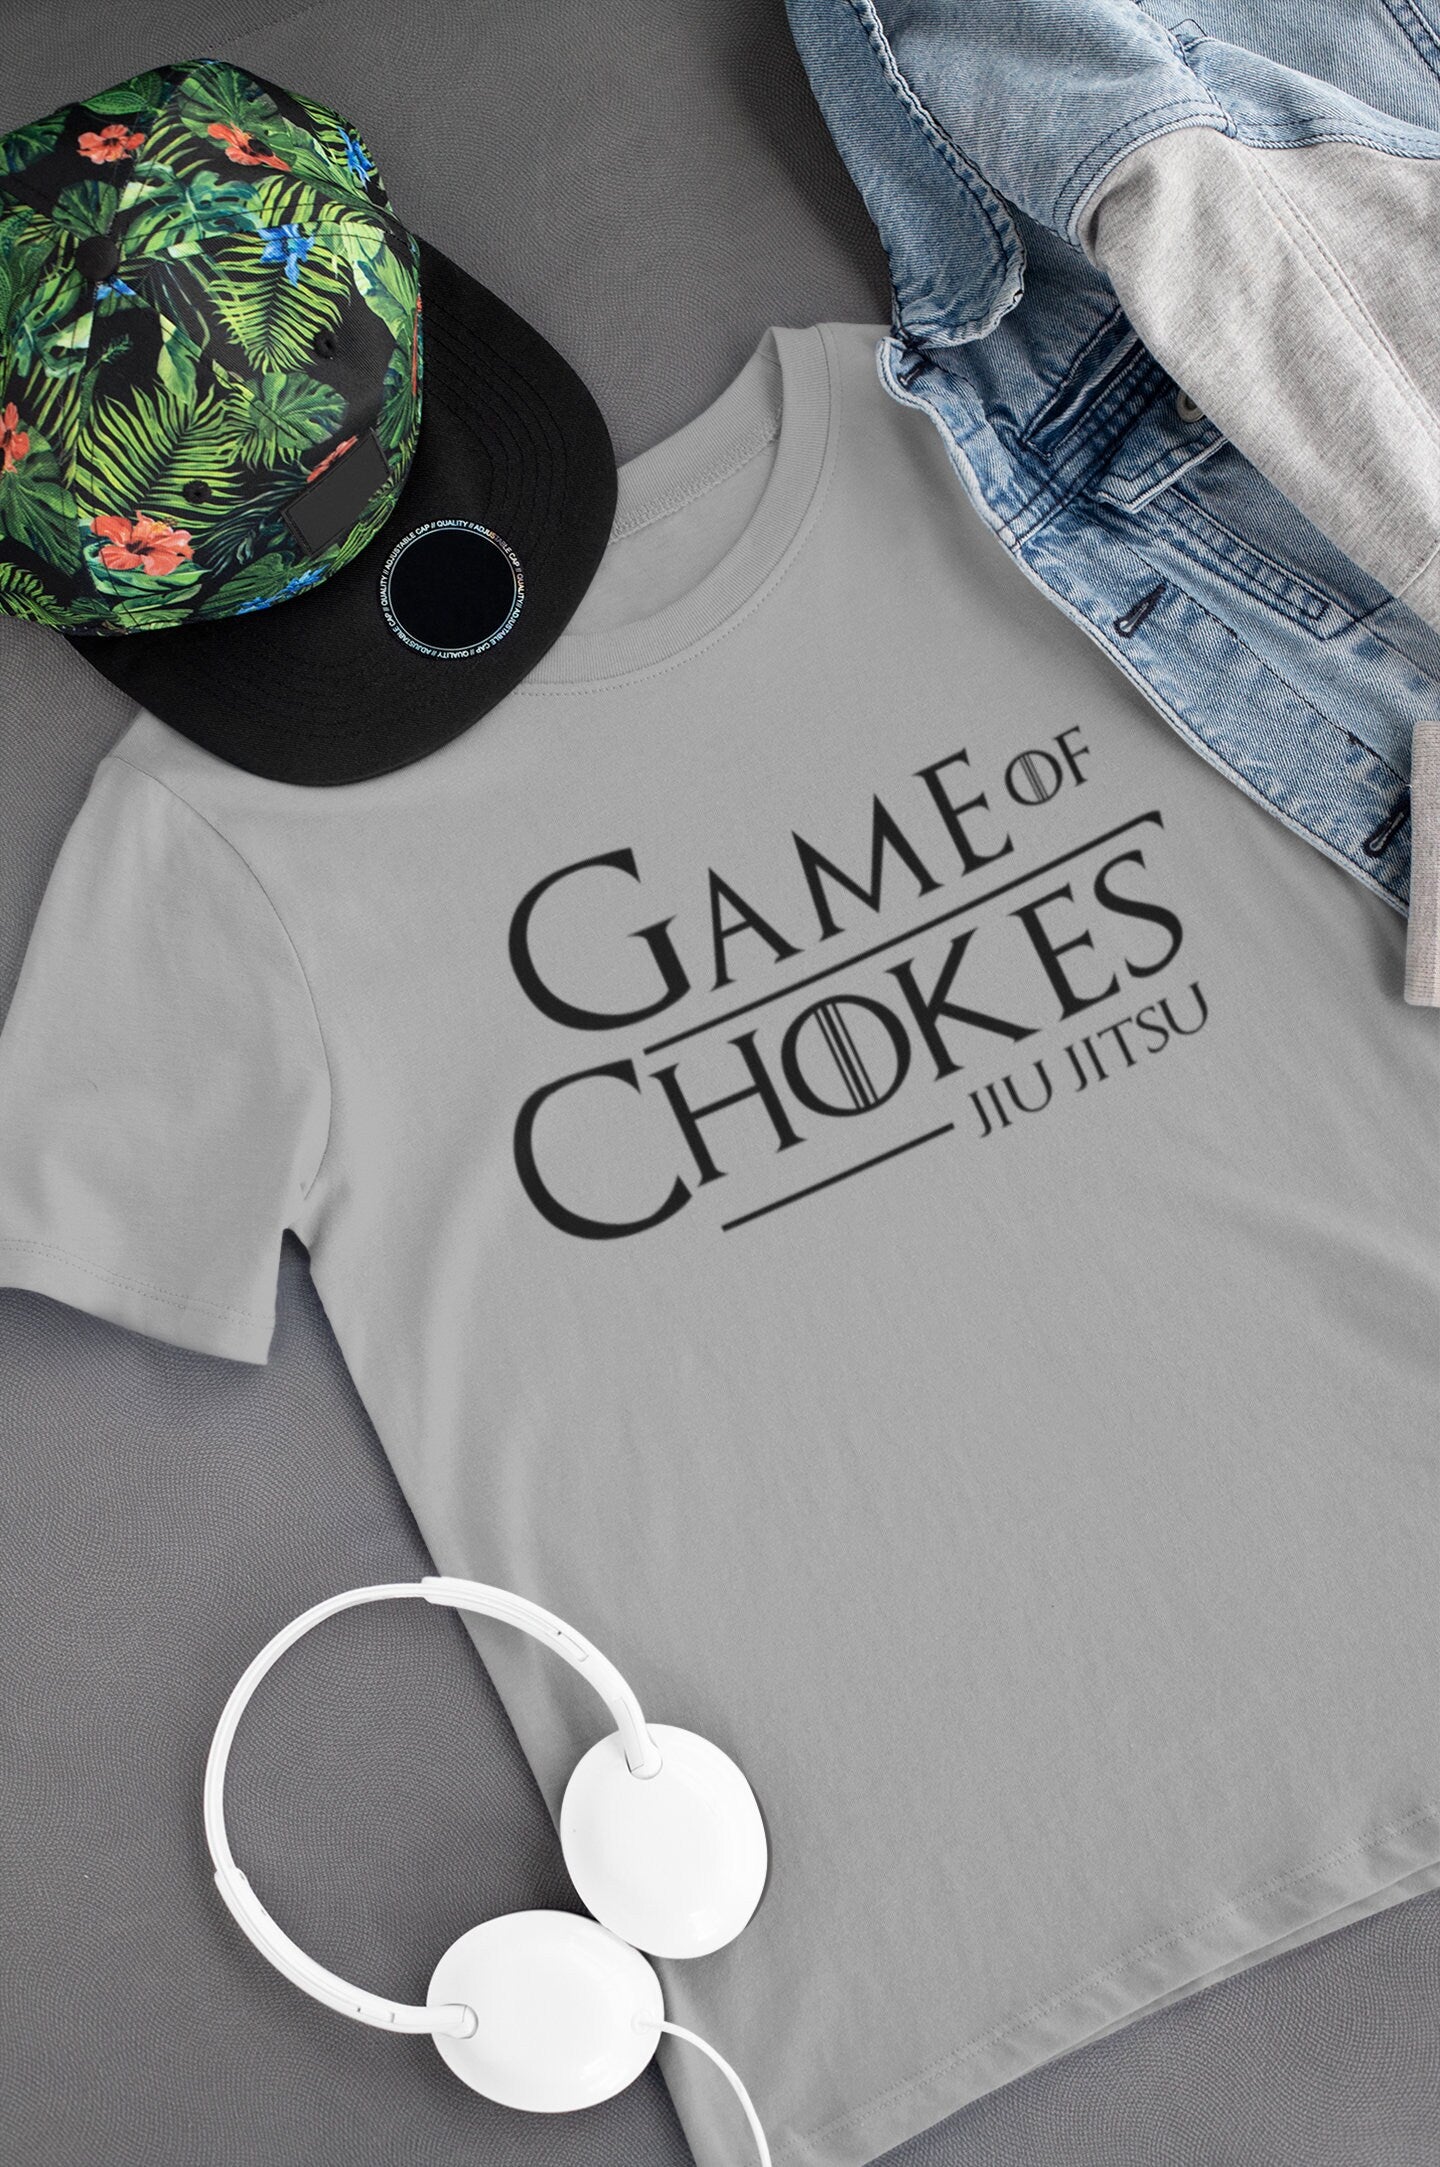 Game of Chokes - Graphic T Shirt